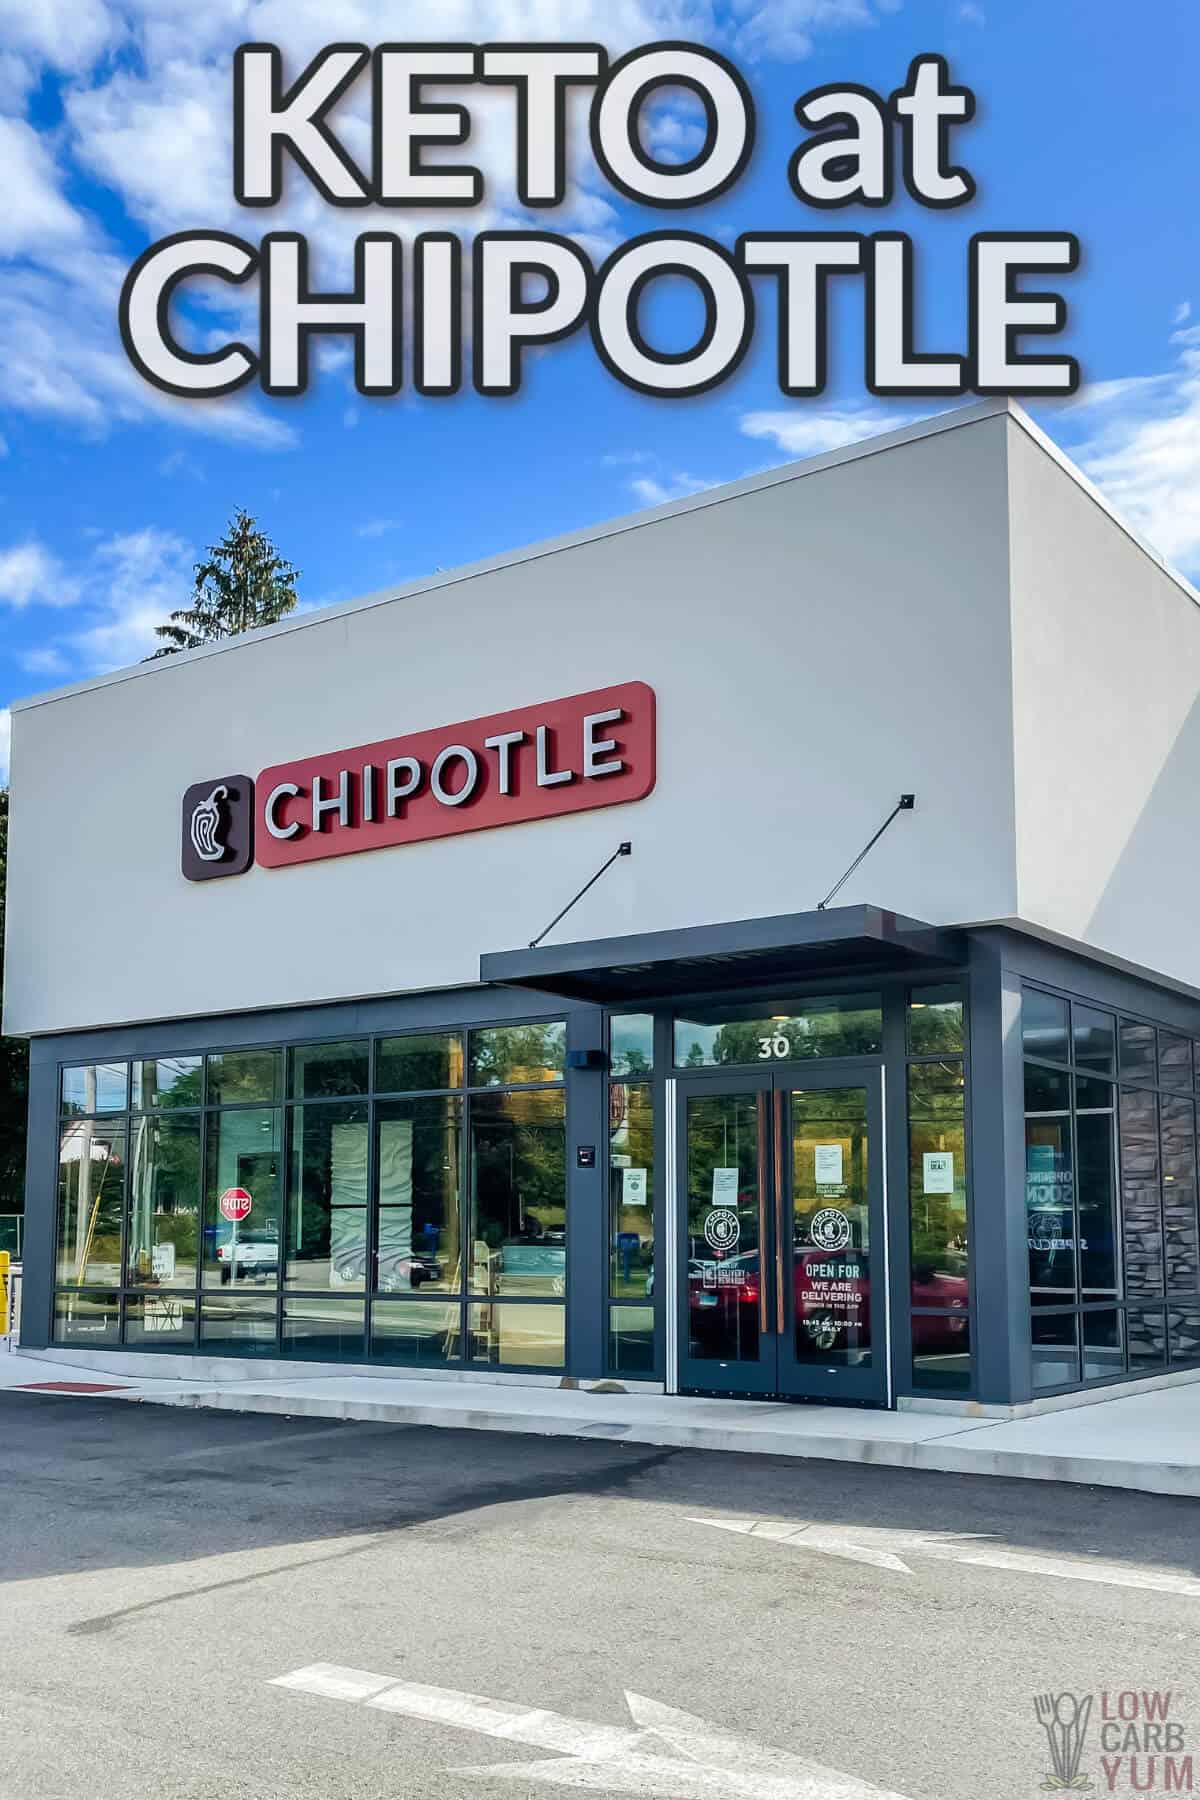 keto at chipotle storefront cover image